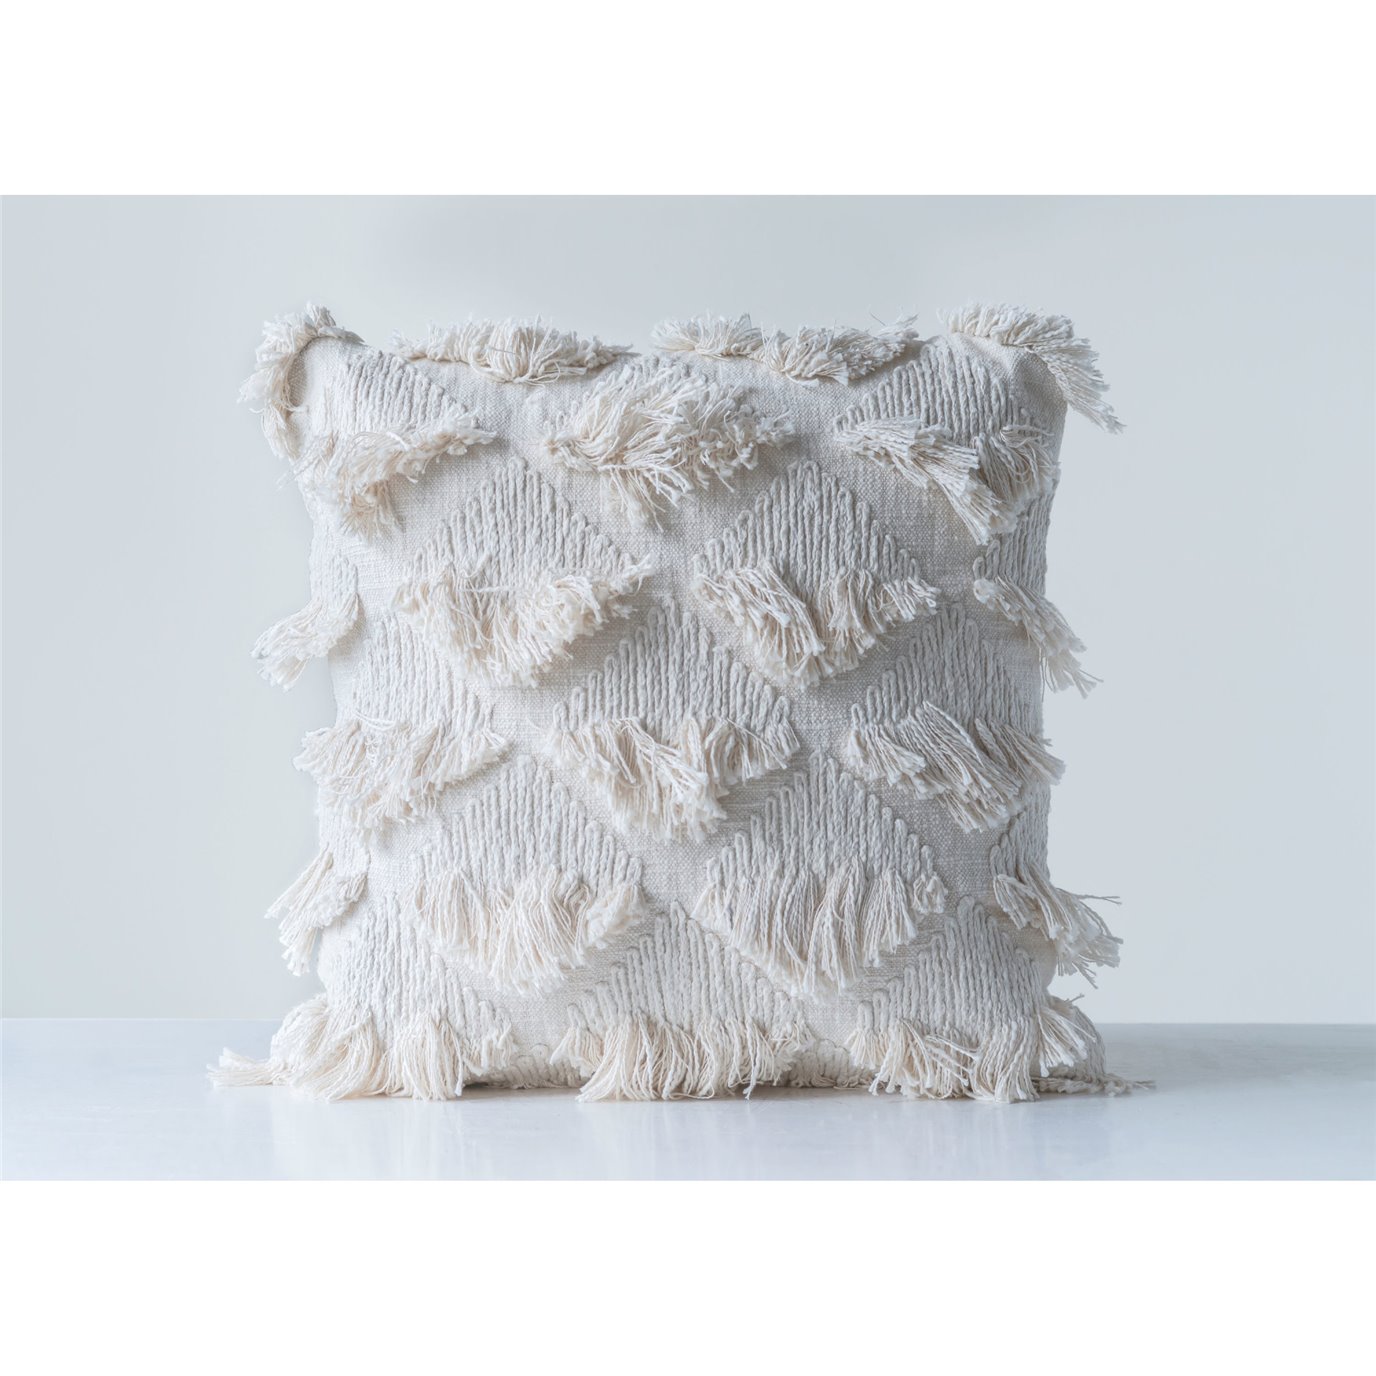 Embroidered White Square Cotton Pillow with Eyelash Fringe